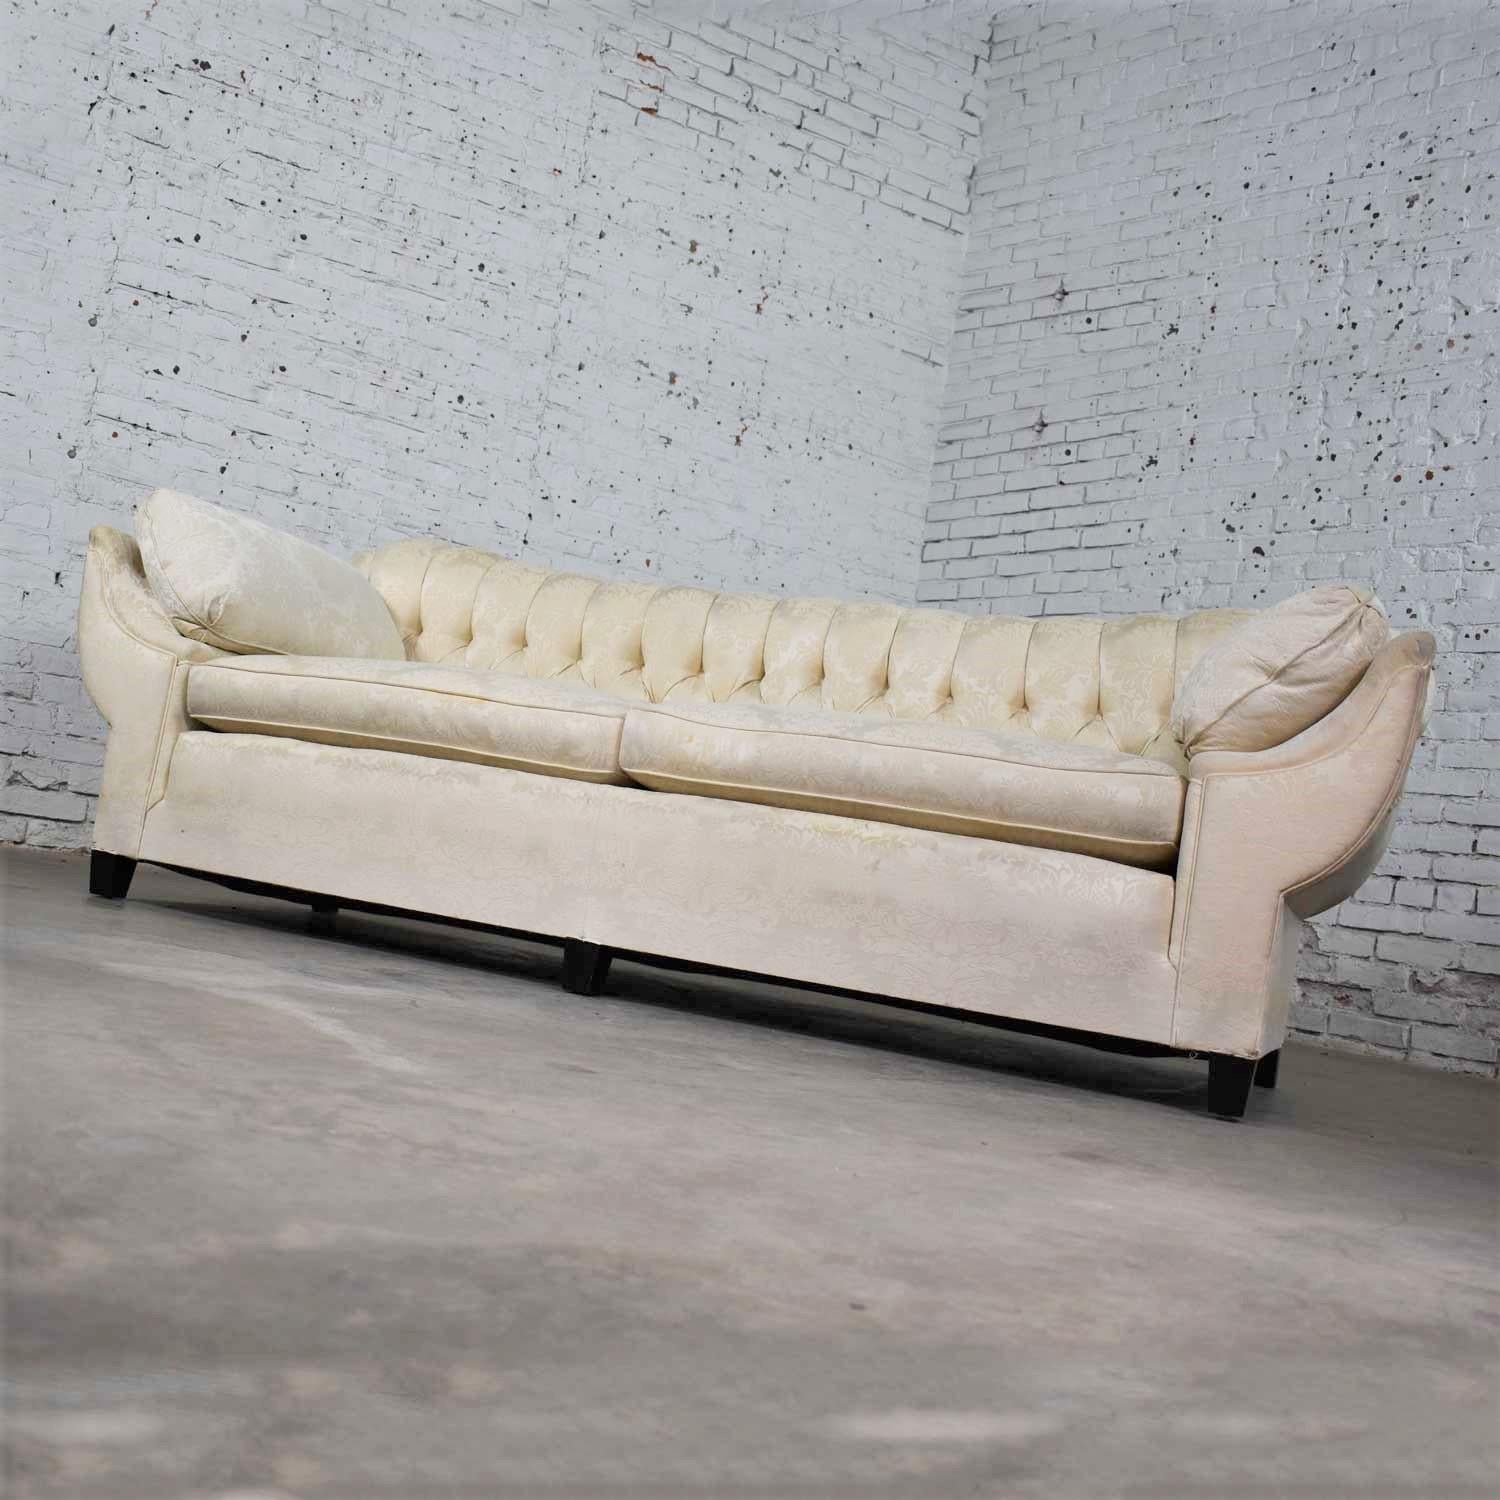 Vintage Art Deco Hollywood Regency Sofa Tufted Back and Concave Pillowed Arms In Fair Condition For Sale In Topeka, KS